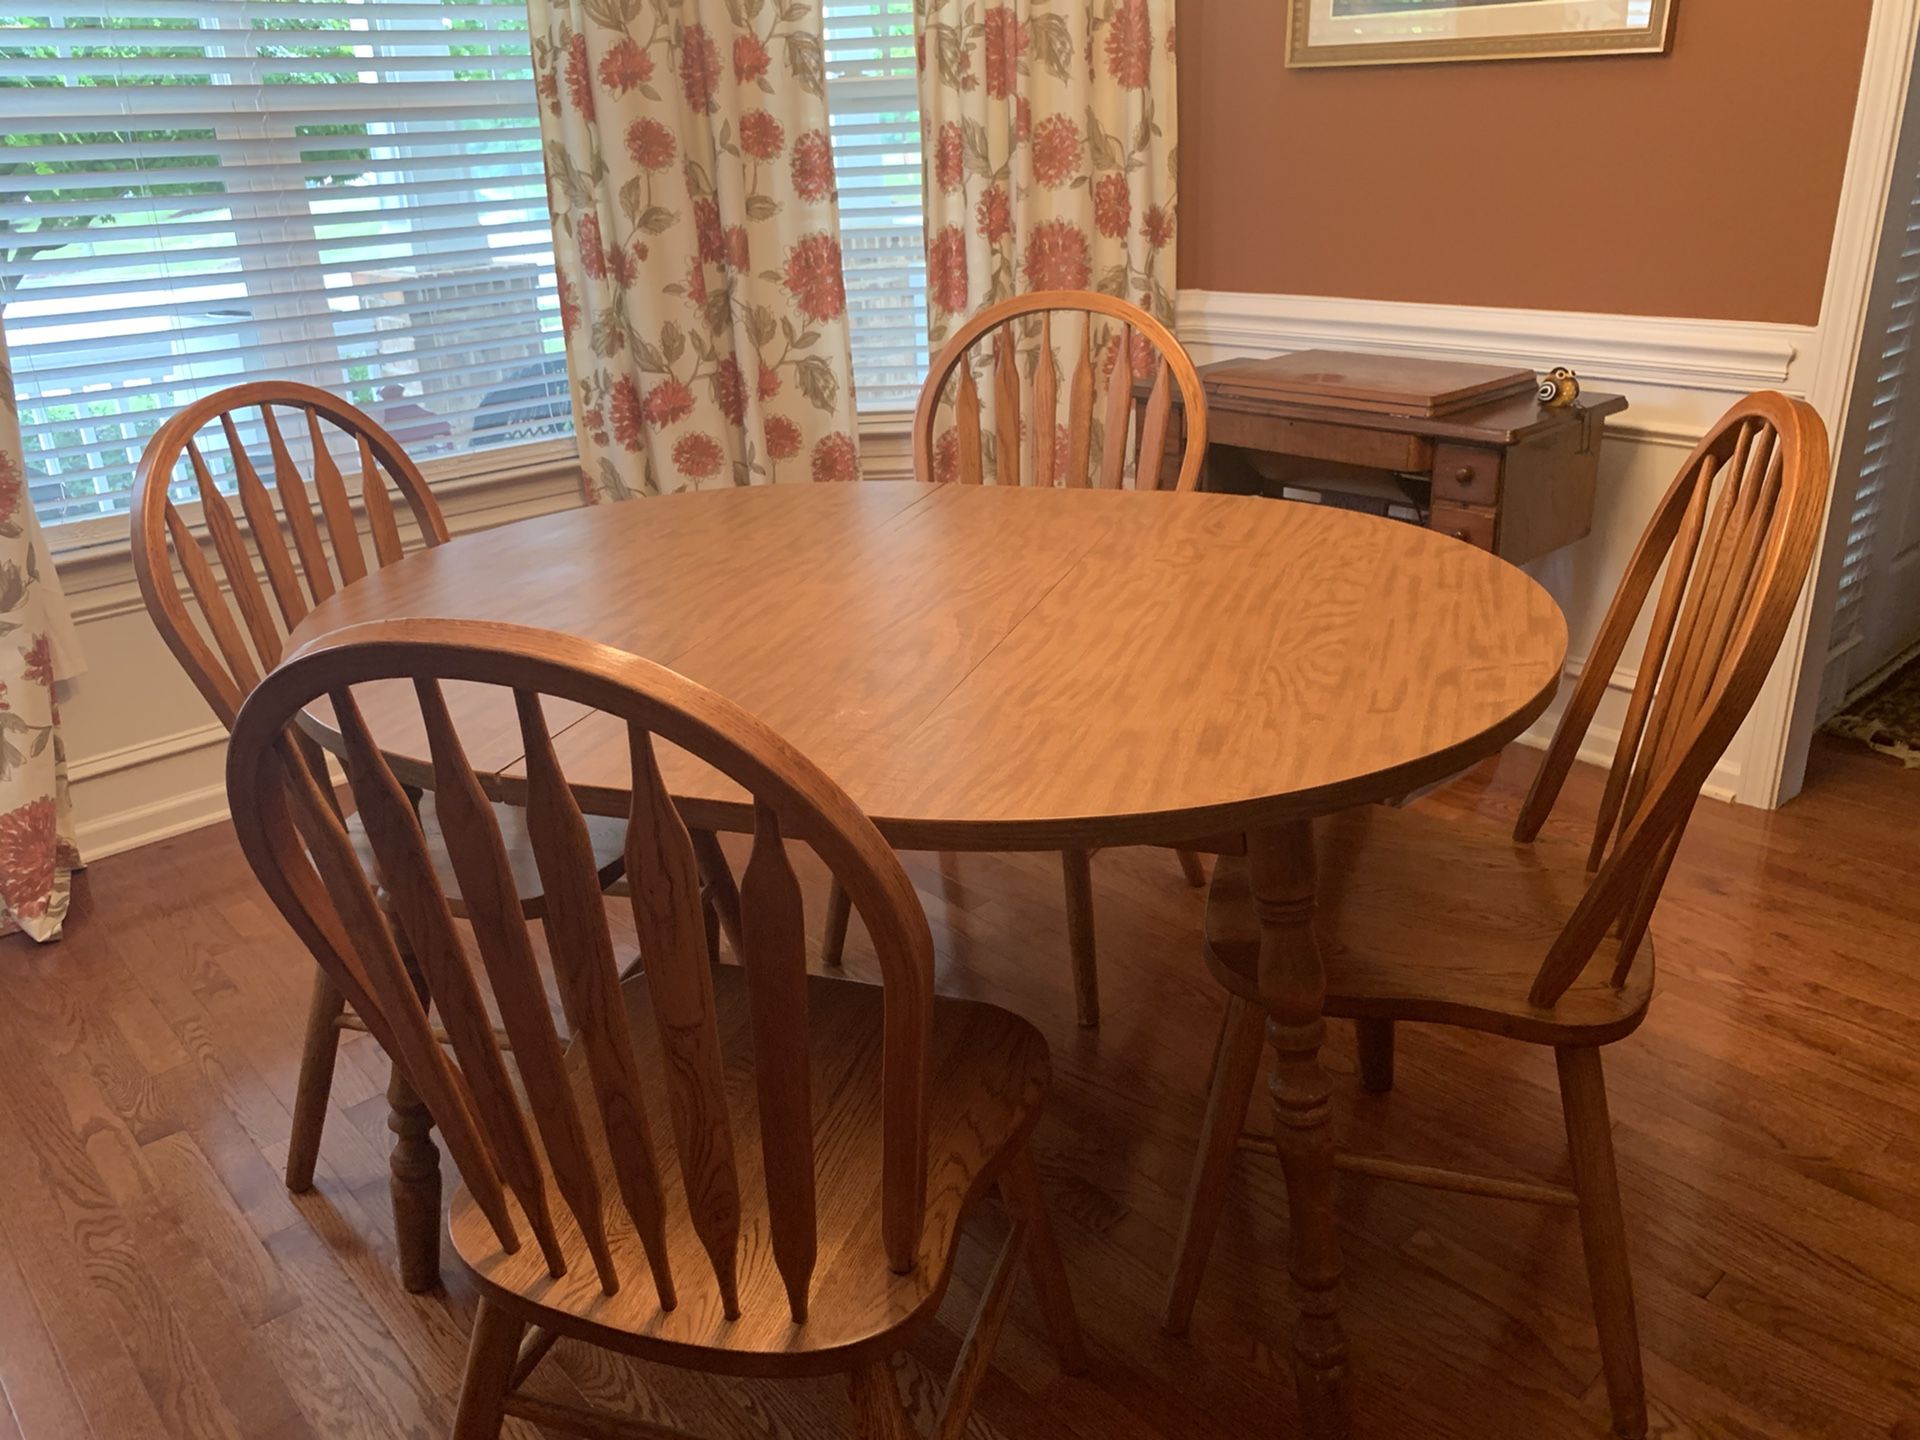 Kitchen Table w/4 chairs